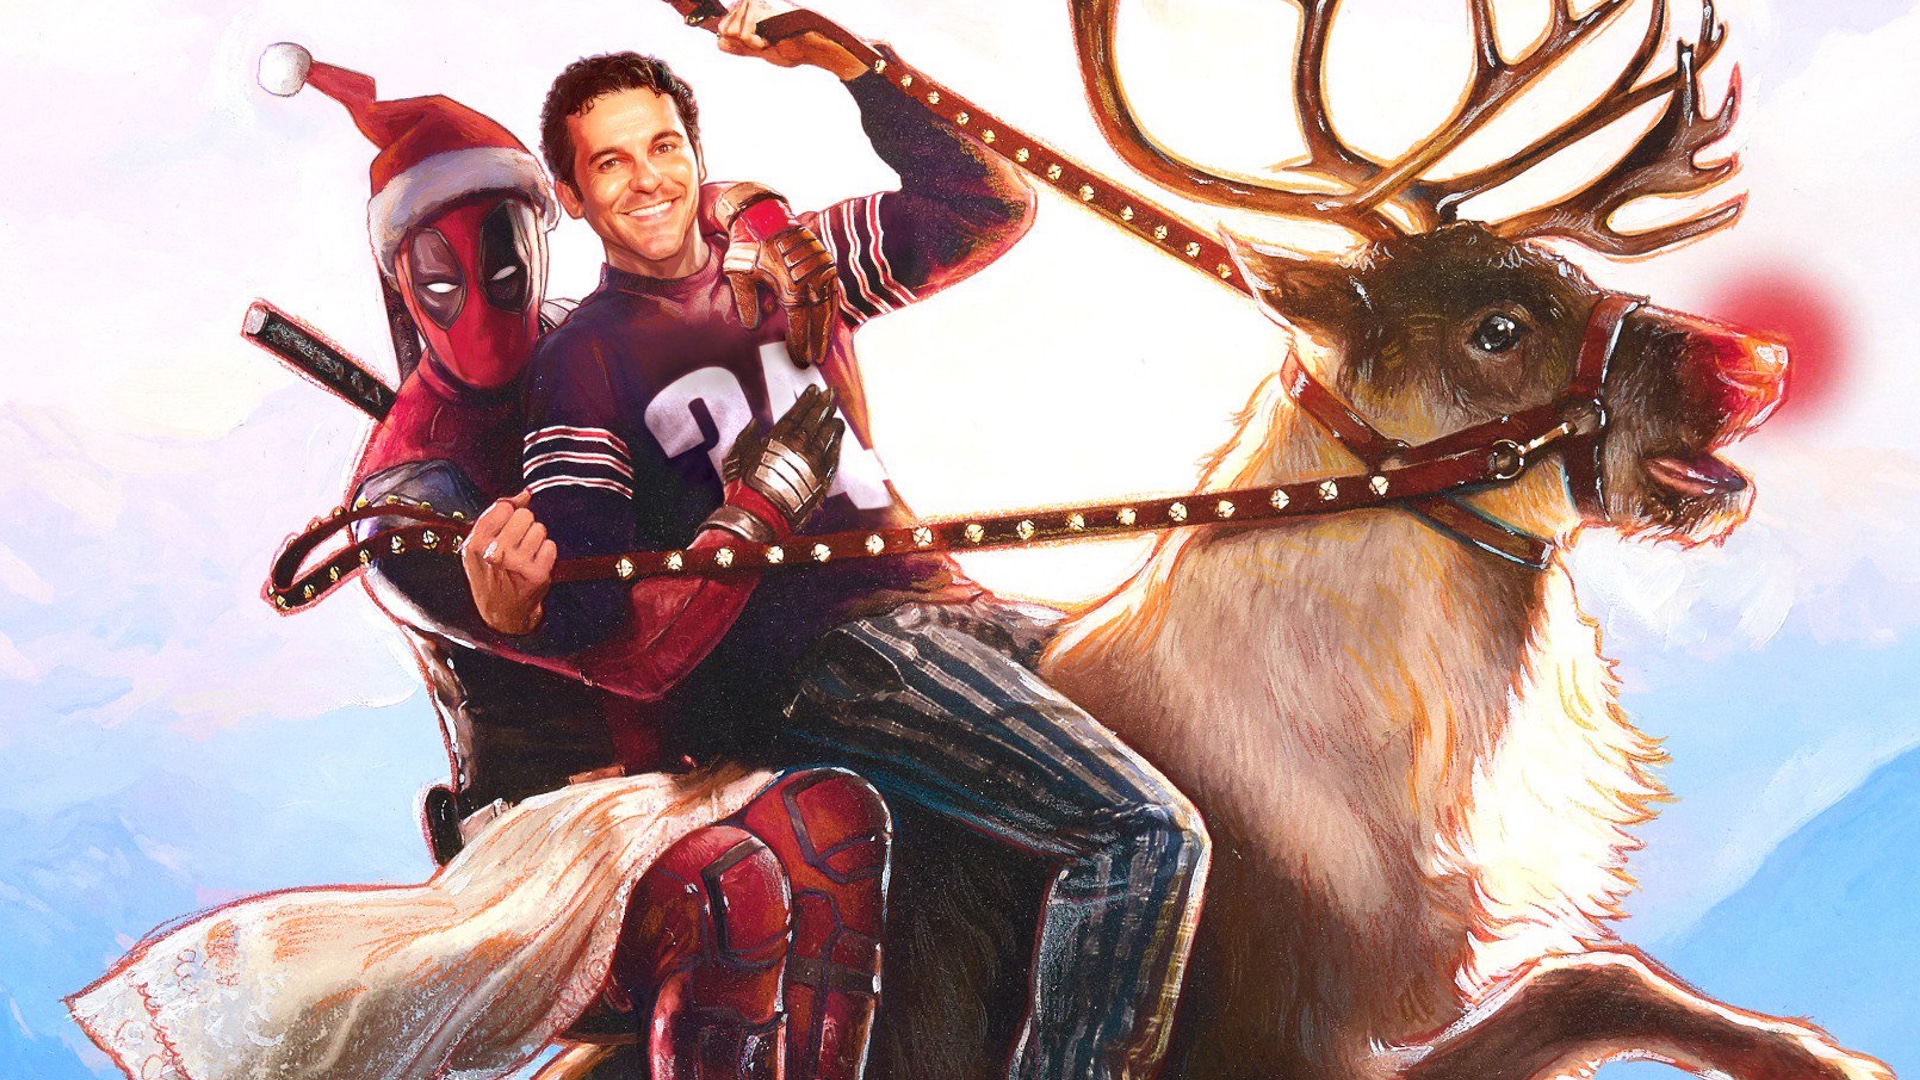 Ryan Reynolds Reached Out To The Guy Who Pitched Plot Of Once